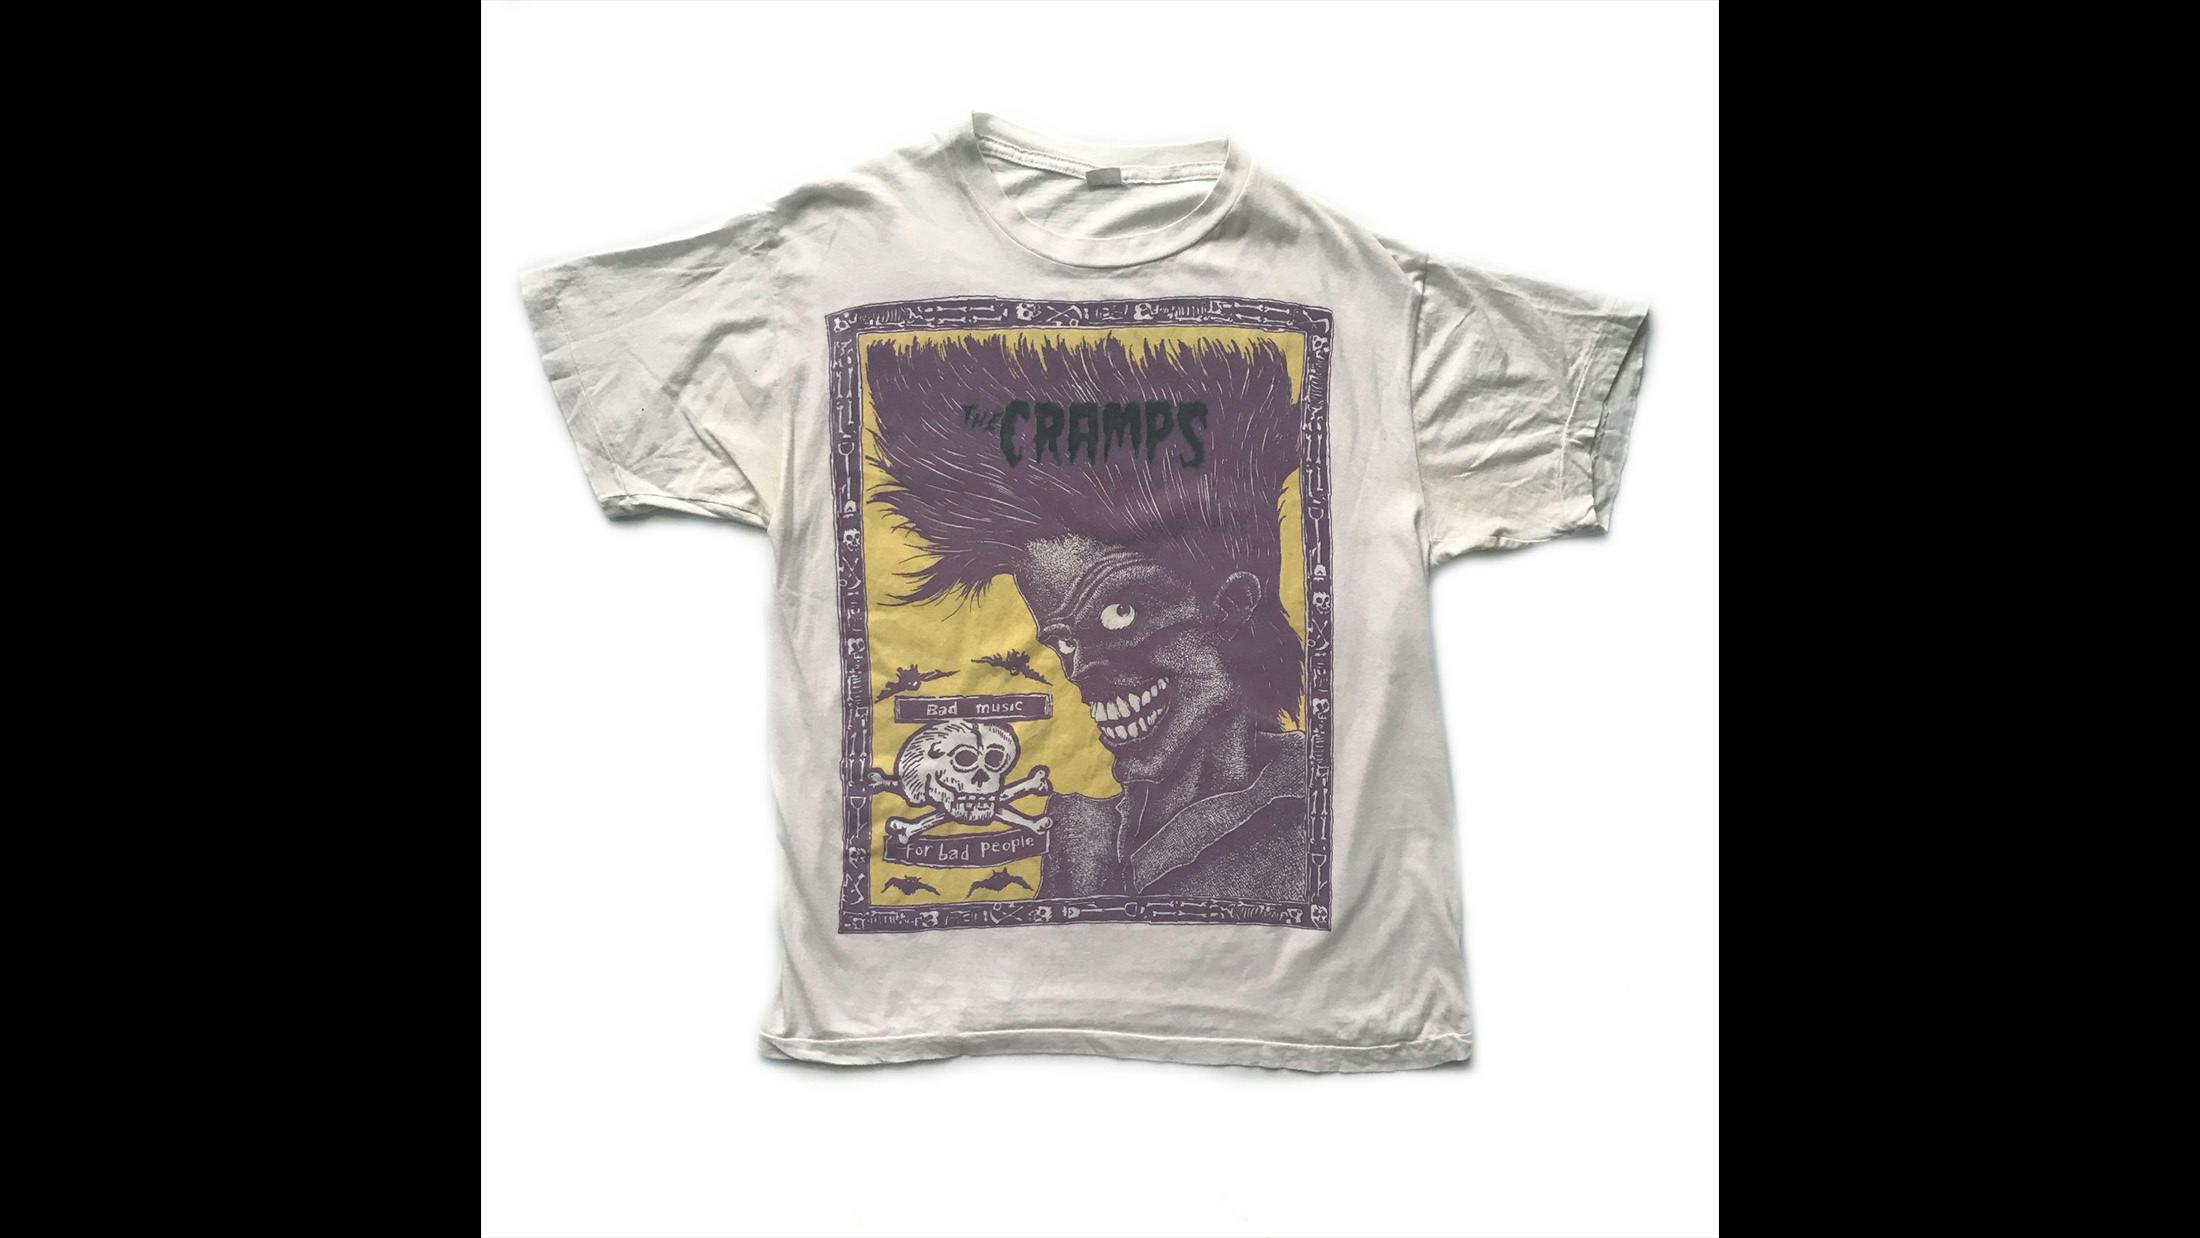 Promo shirt for the 1984 compilation release ‘Bad Music For Bad People’.